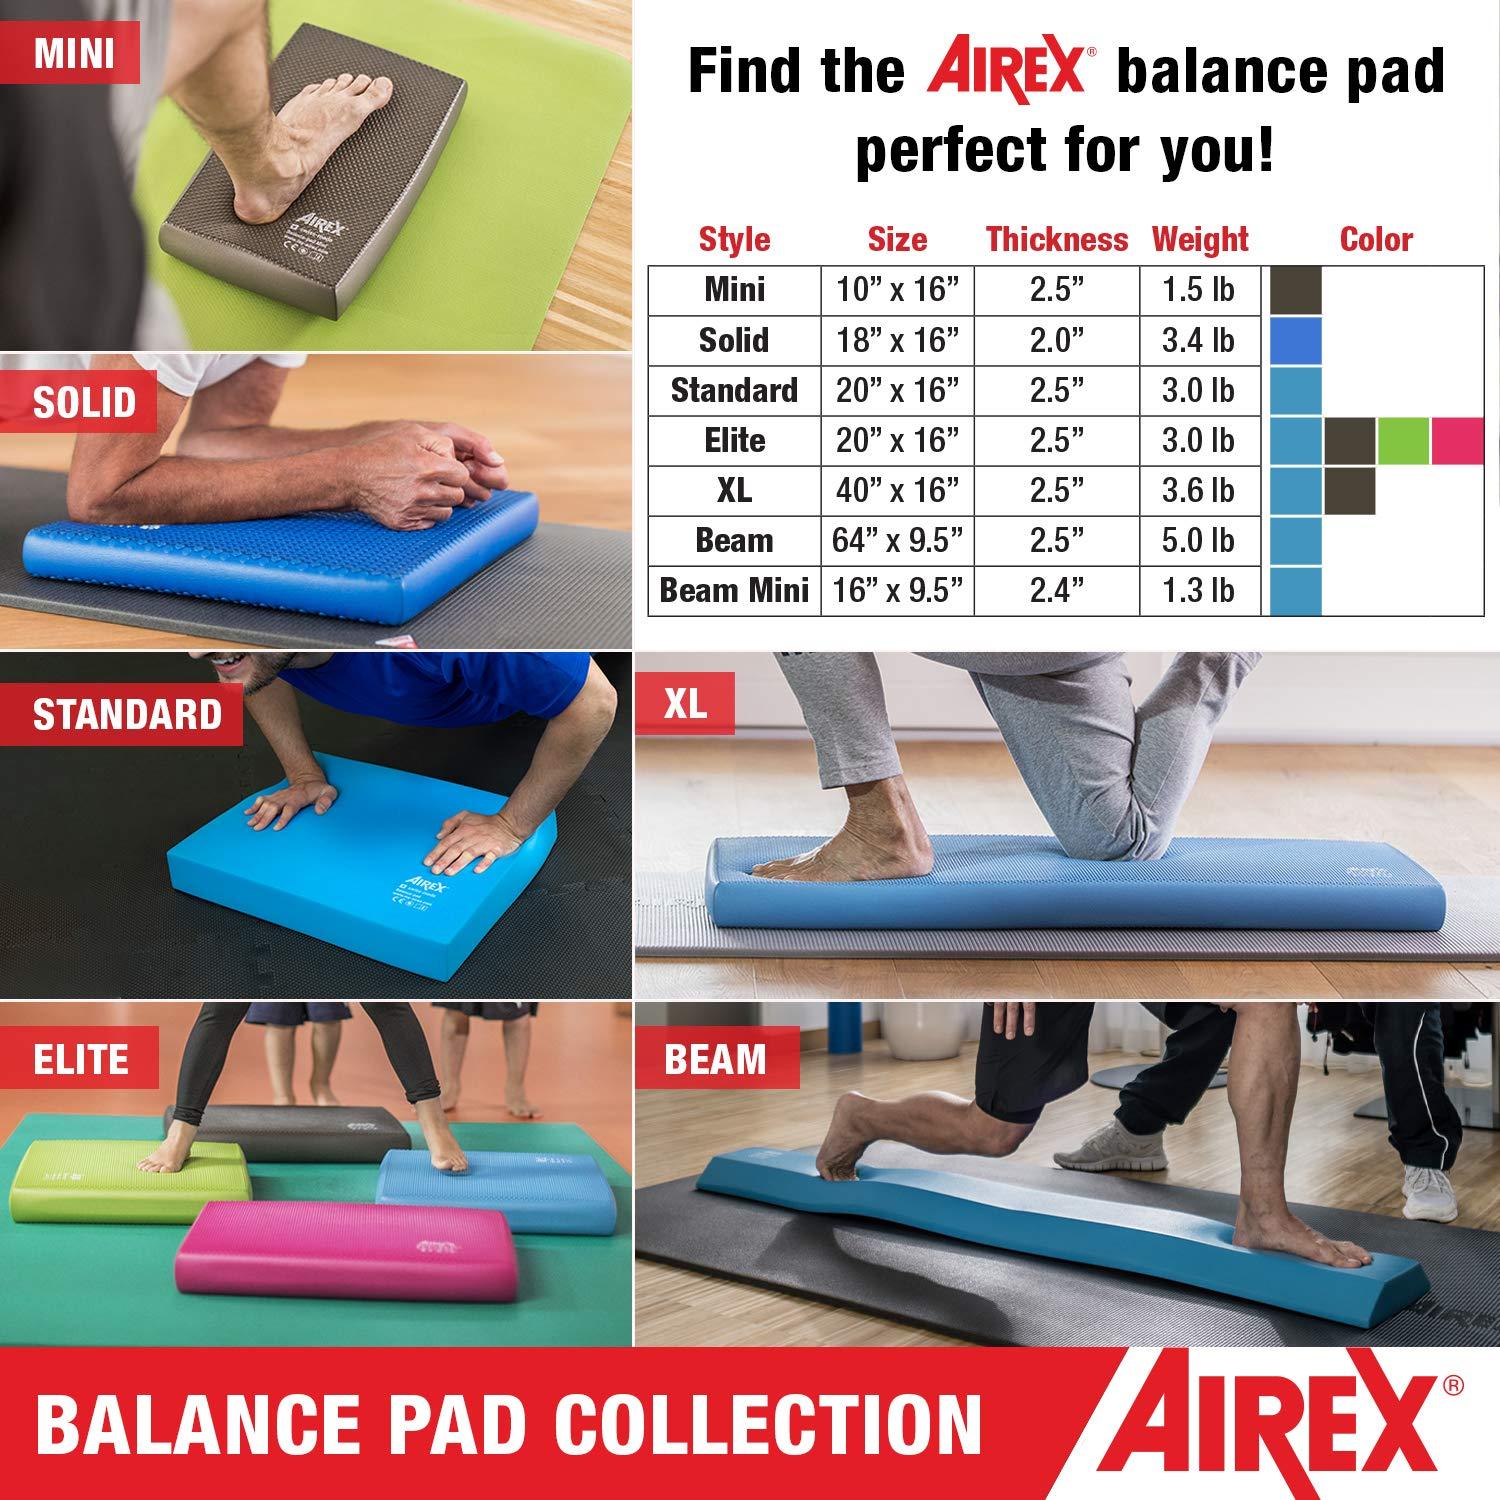 Airex Balance Pad Foam Board Stability Cushion Exercise Trainer for  Balance, Stretching, Physical Therapy, Mobility, Rehabilitation and Core  Strength